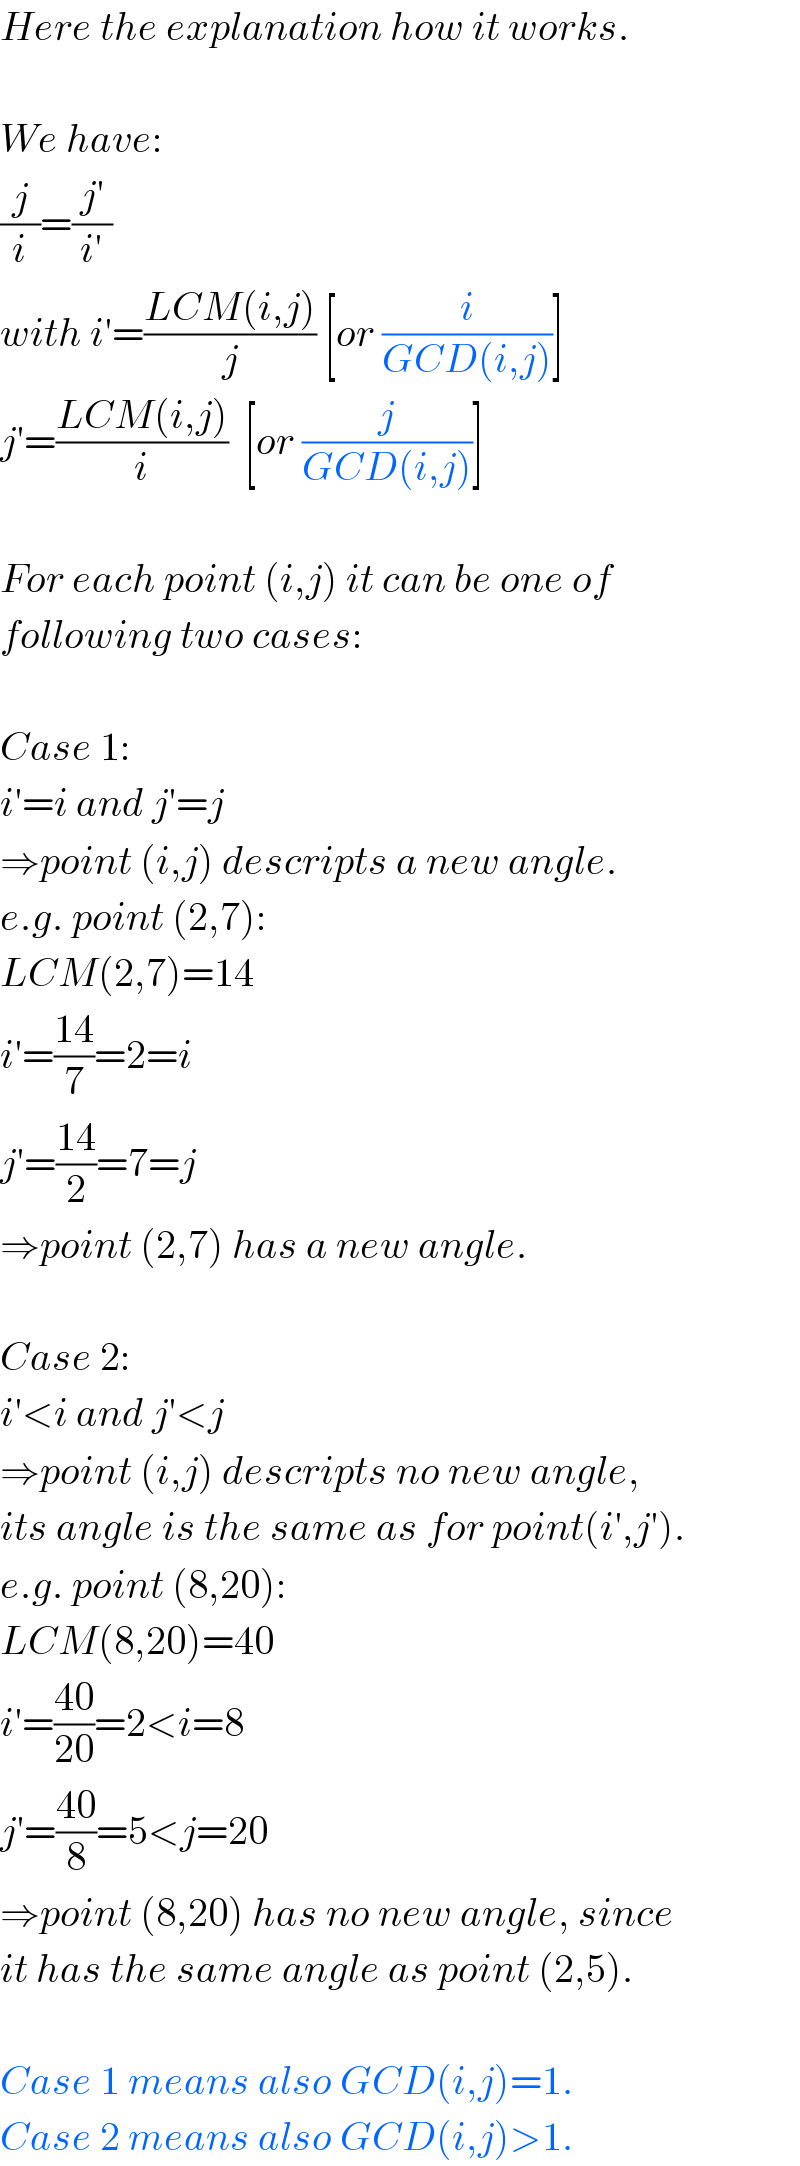 Here the explanation how it works.    We have:  (j/i)=((j′)/(i′))  with i′=((LCM(i,j))/j) [or (i/(GCD(i,j)))]  j′=((LCM(i,j))/i)  [or (j/(GCD(i,j)))]    For each point (i,j) it can be one of  following two cases:    Case 1:  i′=i and j′=j  ⇒point (i,j) descripts a new angle.  e.g. point (2,7):  LCM(2,7)=14  i′=((14)/7)=2=i  j′=((14)/2)=7=j  ⇒point (2,7) has a new angle.    Case 2:  i′<i and j′<j  ⇒point (i,j) descripts no new angle,  its angle is the same as for point(i′,j′).  e.g. point (8,20):  LCM(8,20)=40  i′=((40)/(20))=2<i=8  j′=((40)/8)=5<j=20  ⇒point (8,20) has no new angle, since  it has the same angle as point (2,5).    Case 1 means also GCD(i,j)=1.  Case 2 means also GCD(i,j)>1.  